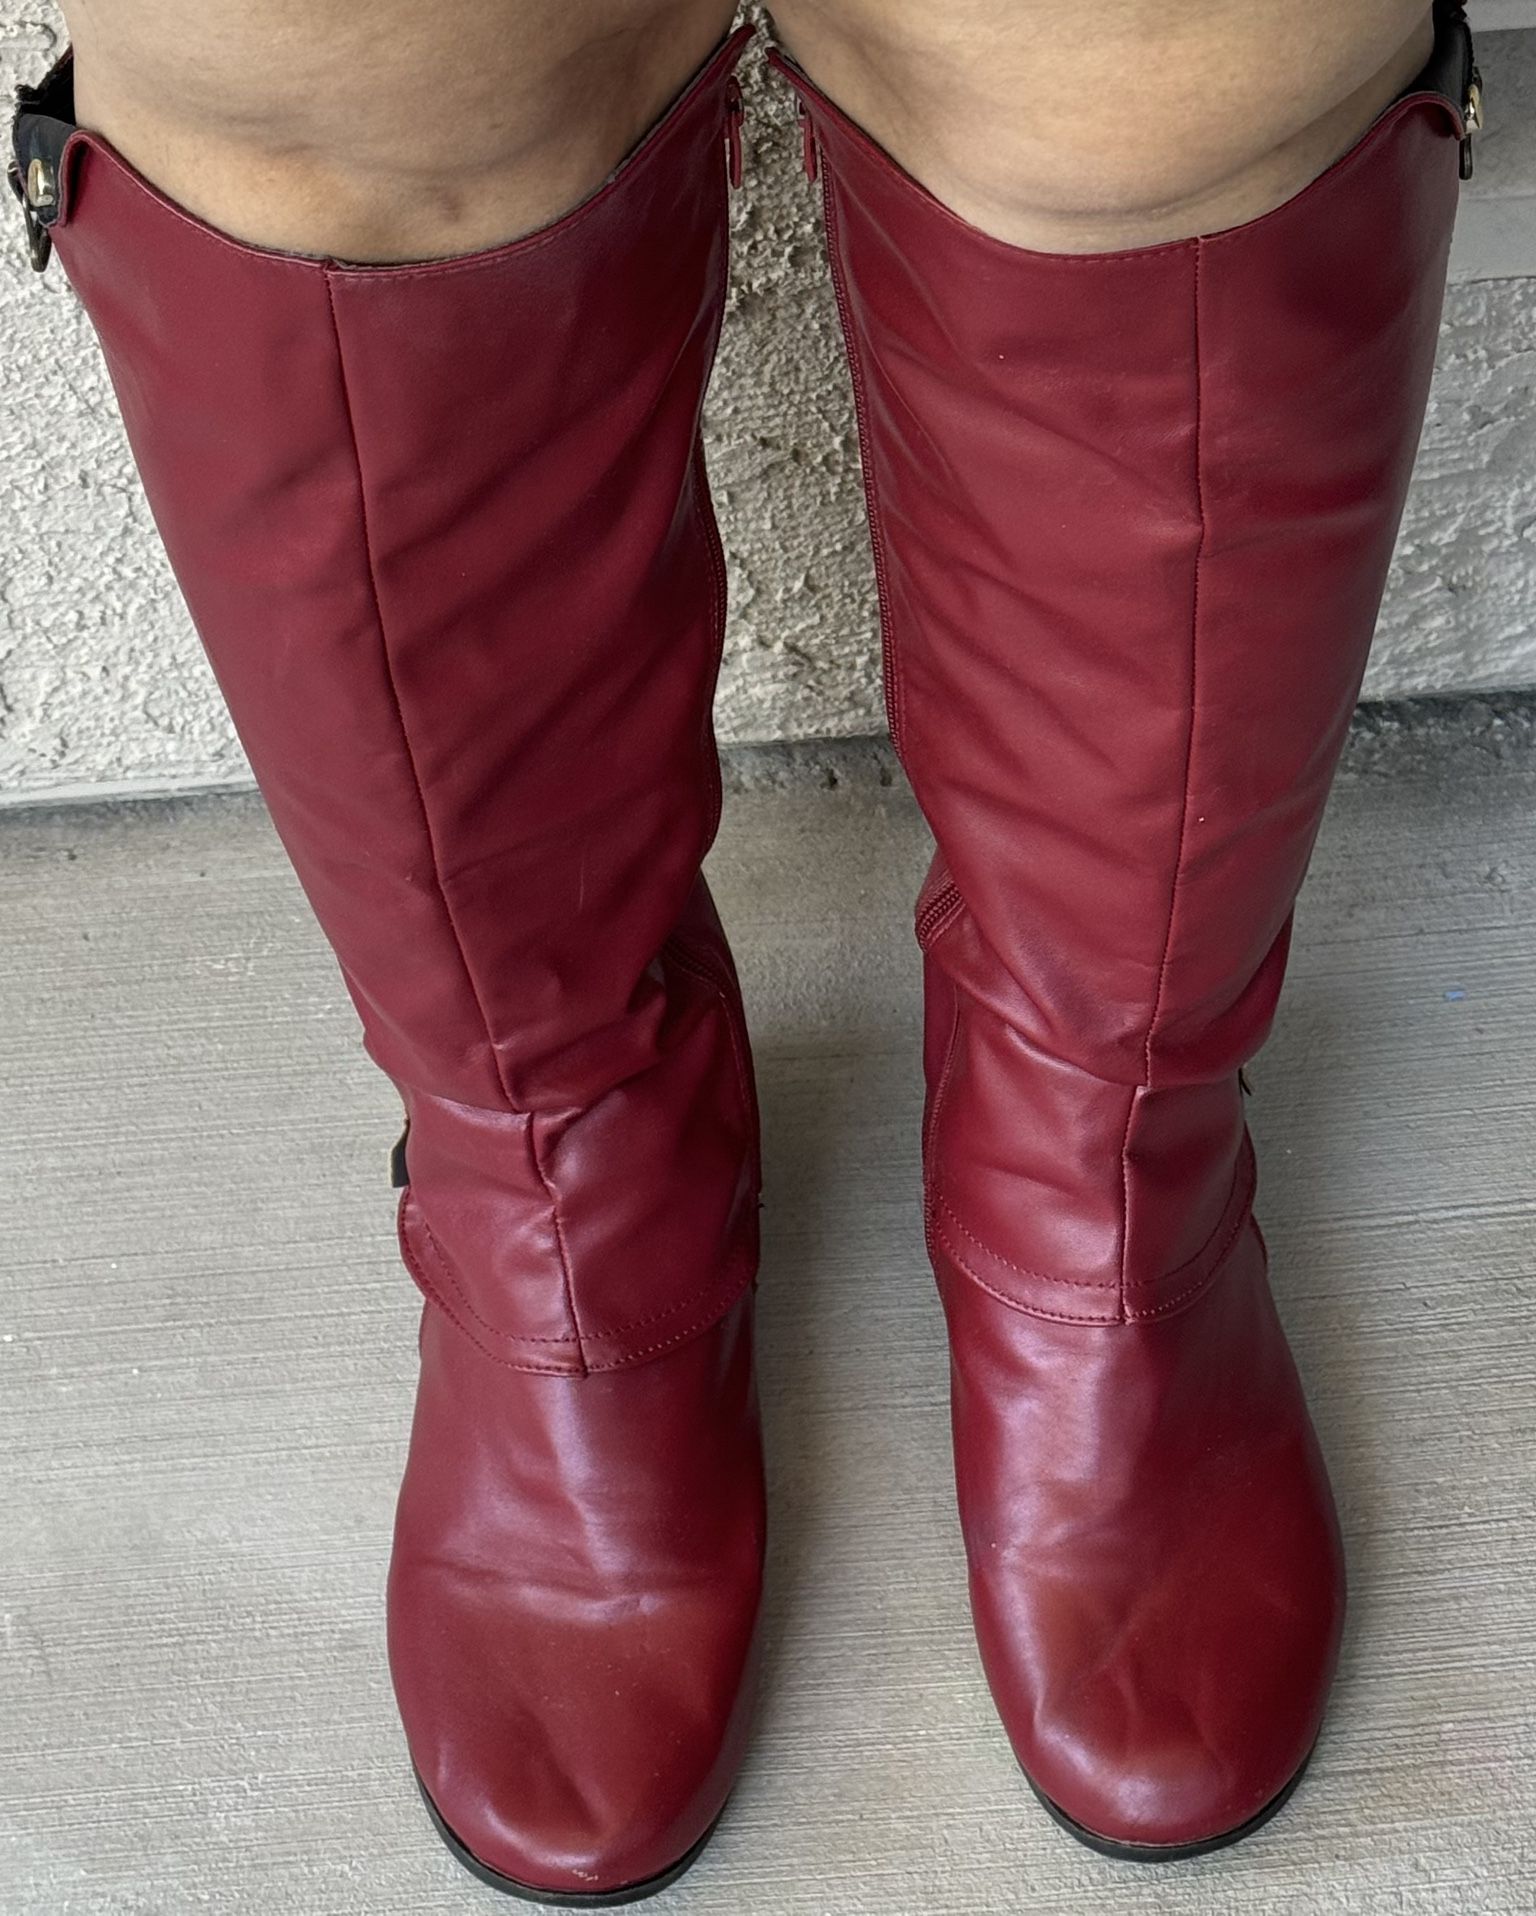 Long Boots 